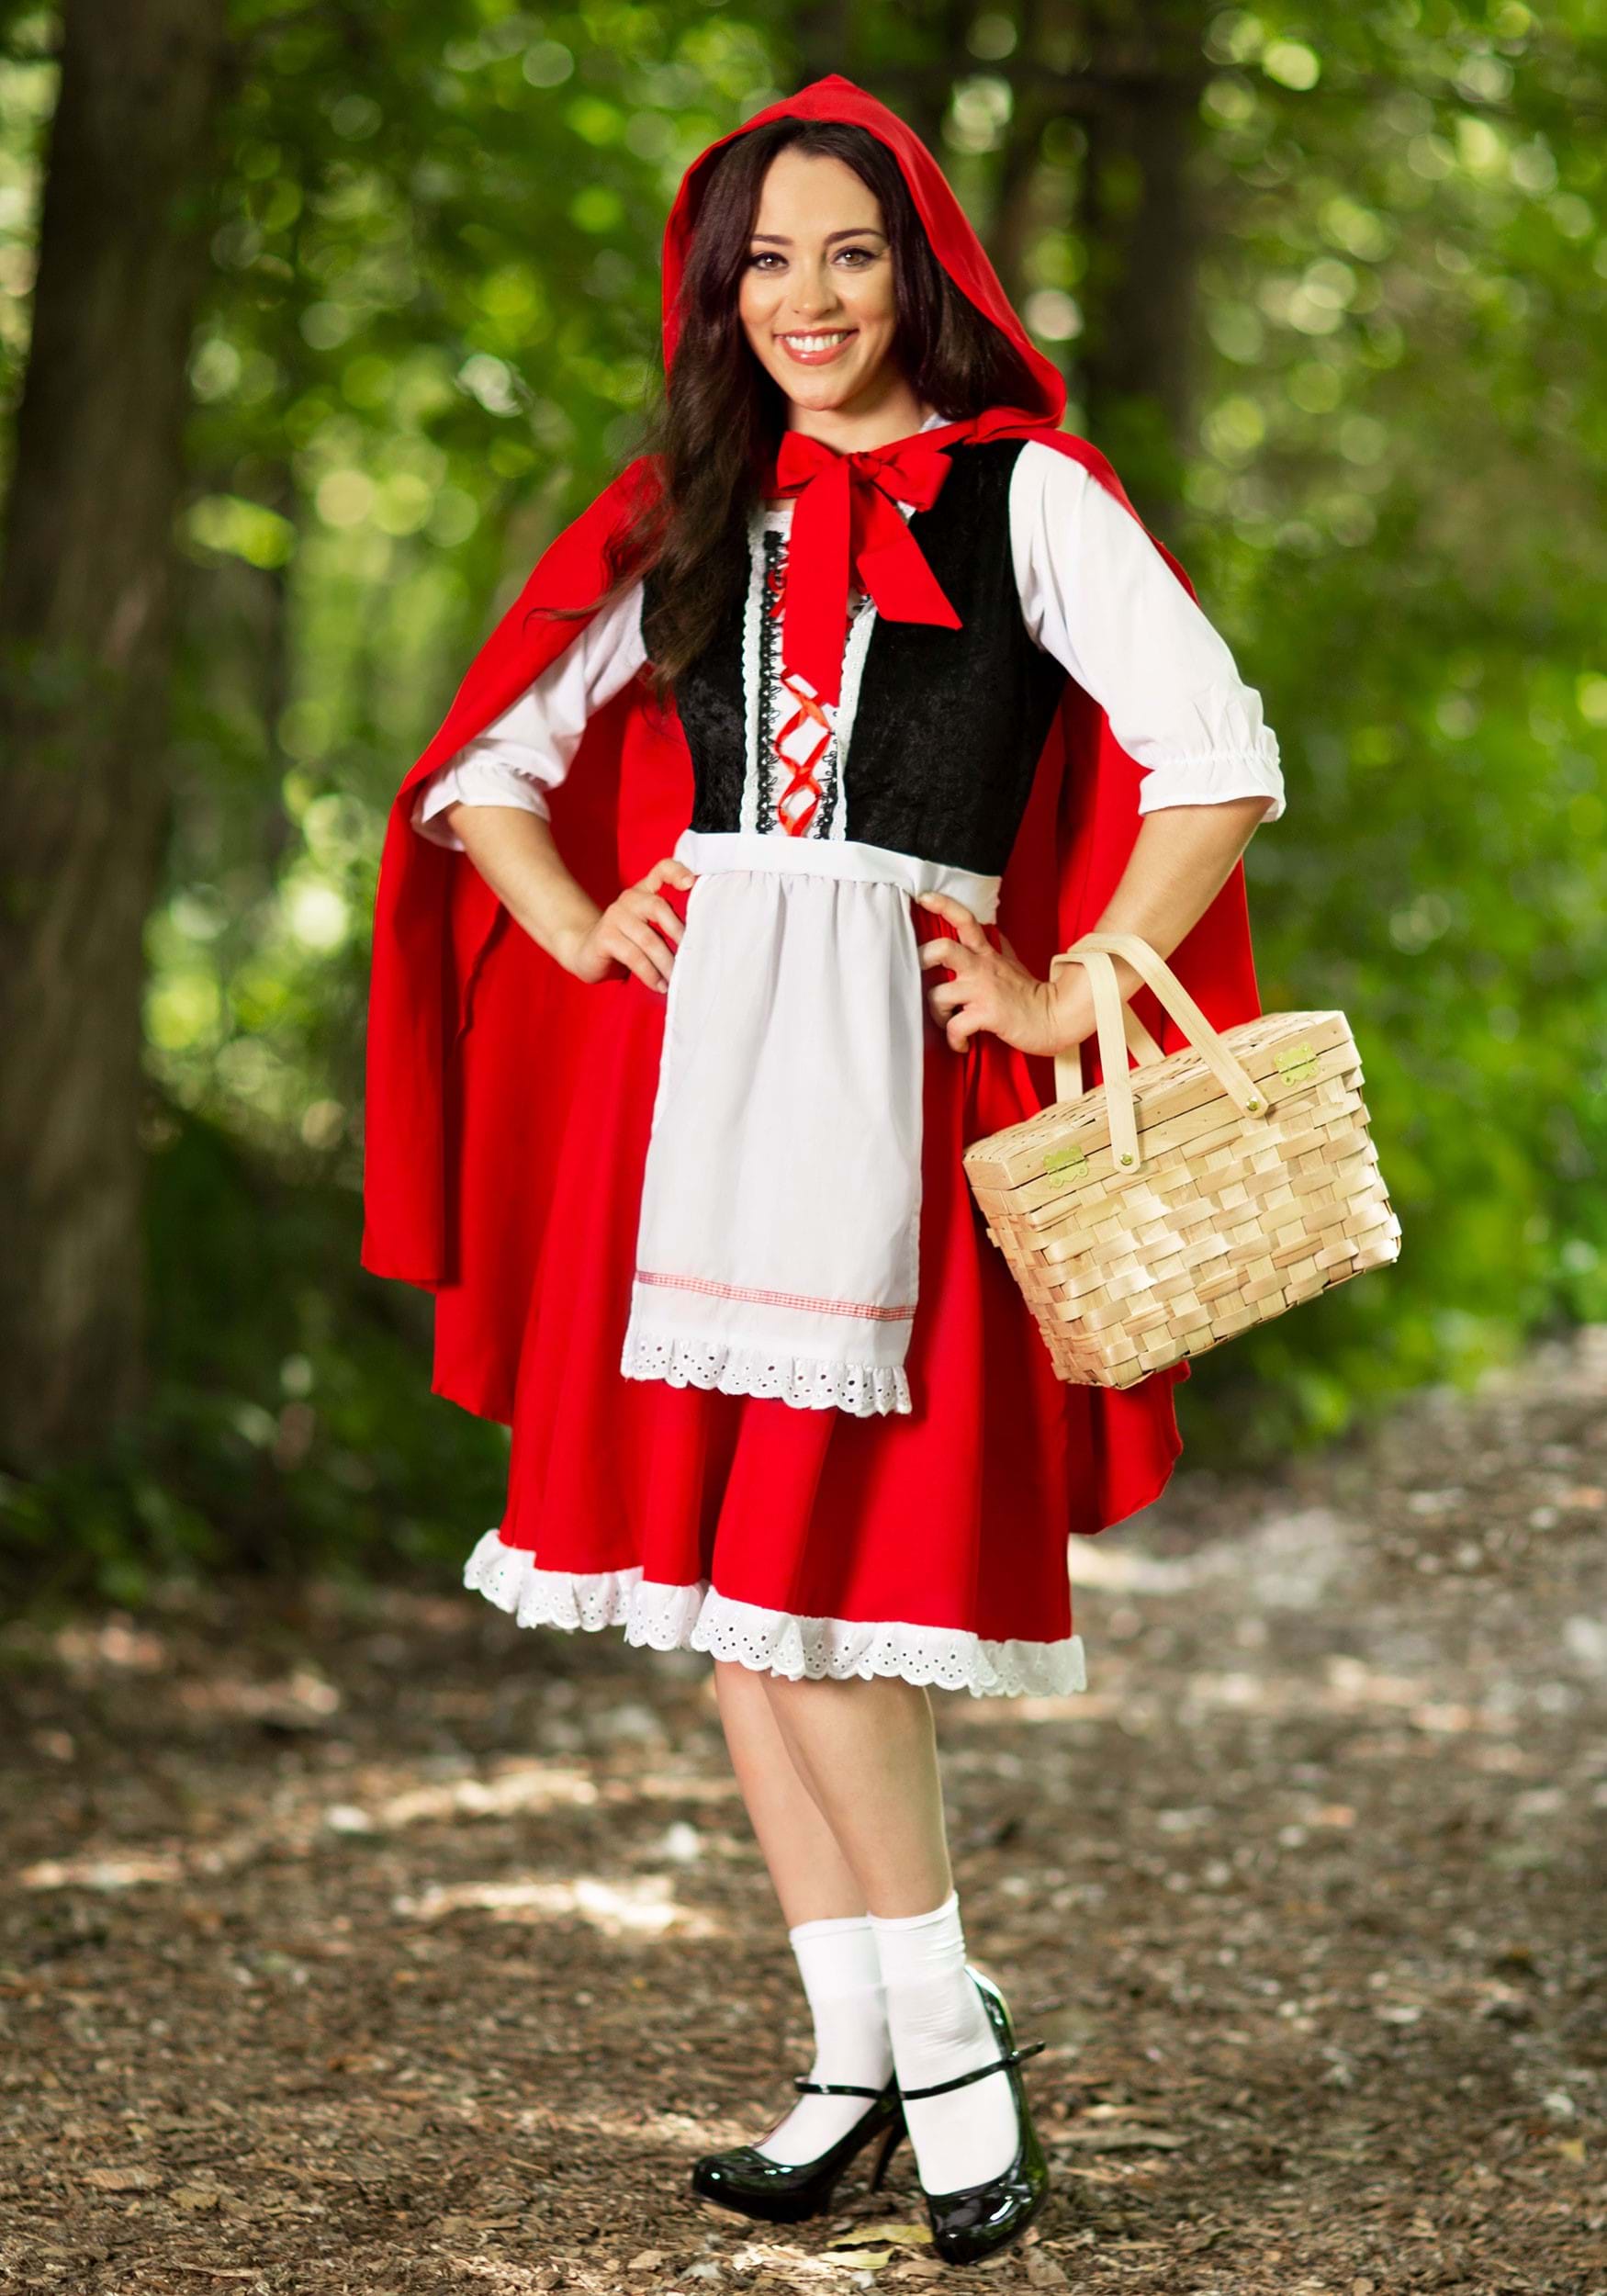 demand During ~ world Little Red Riding Hood Costume for Adults